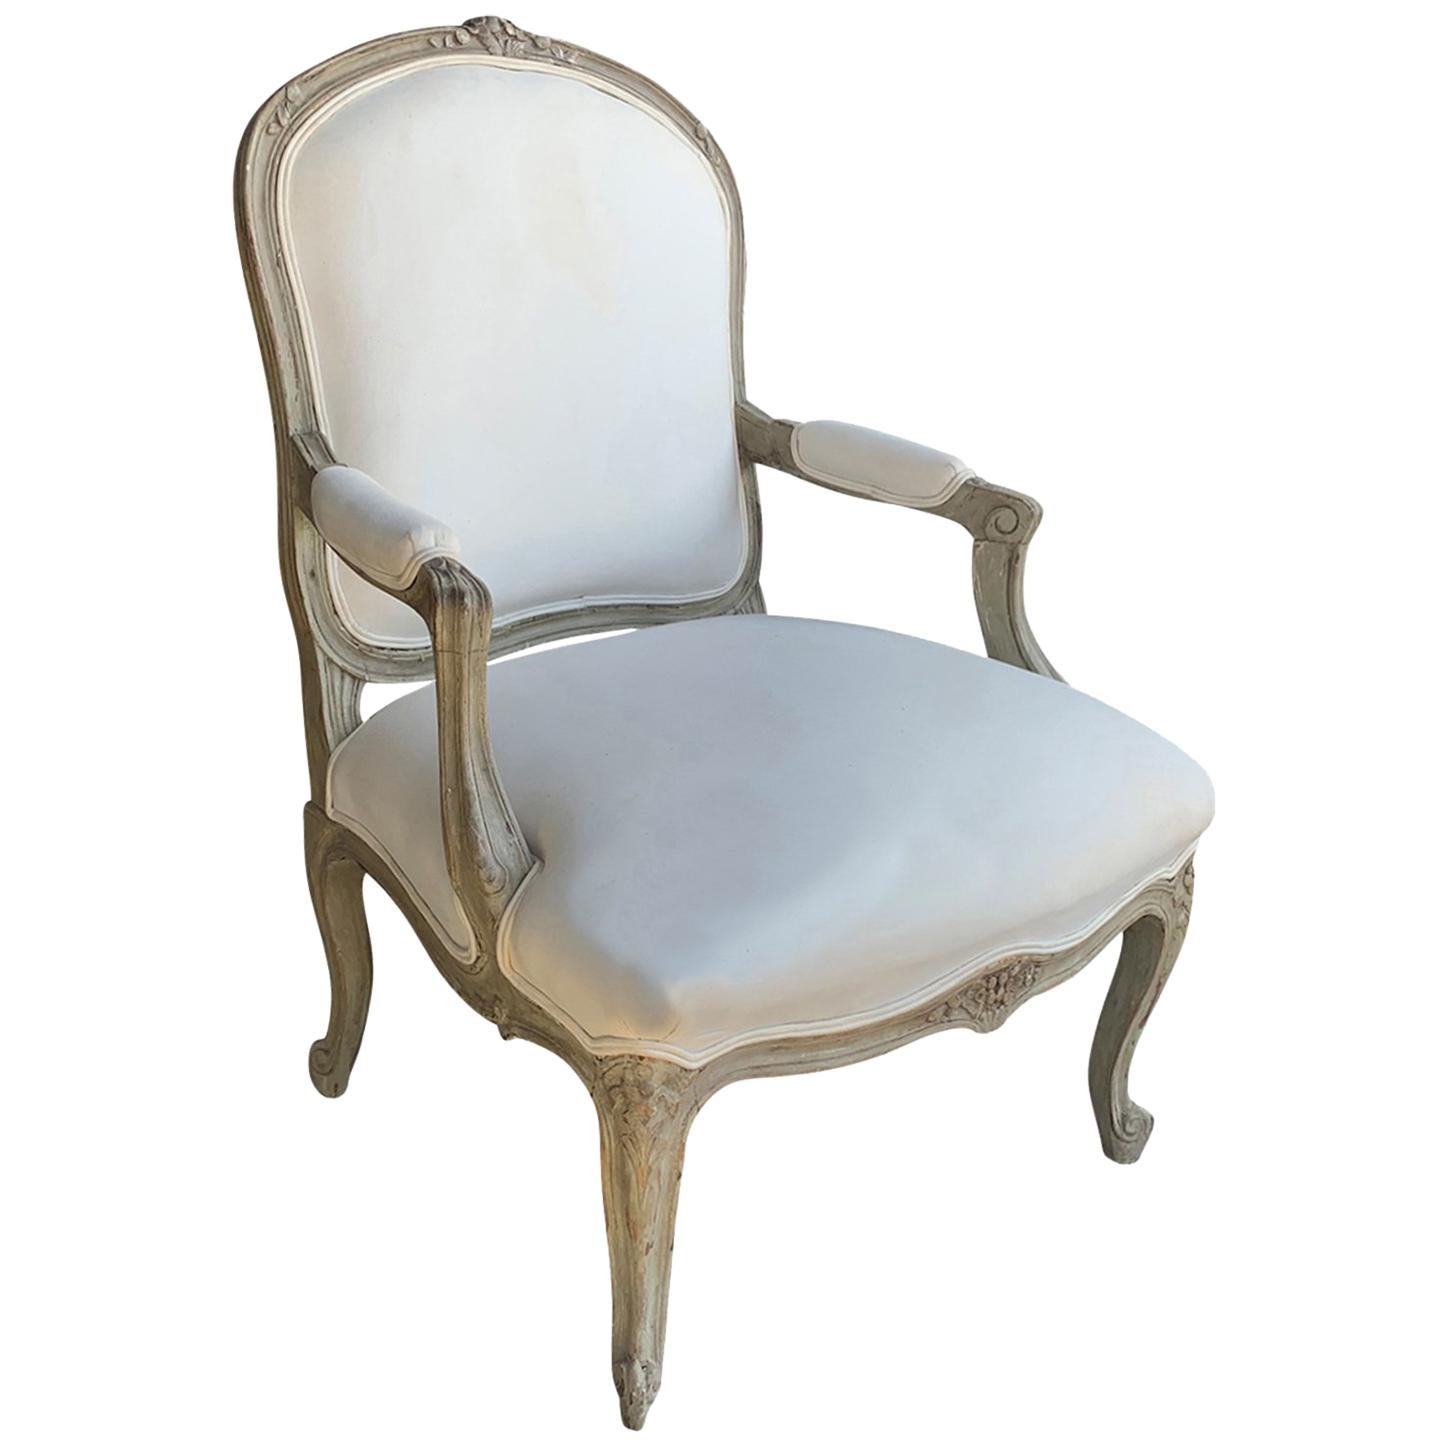 19th Century French Louis XV Style Painted Fauteuil